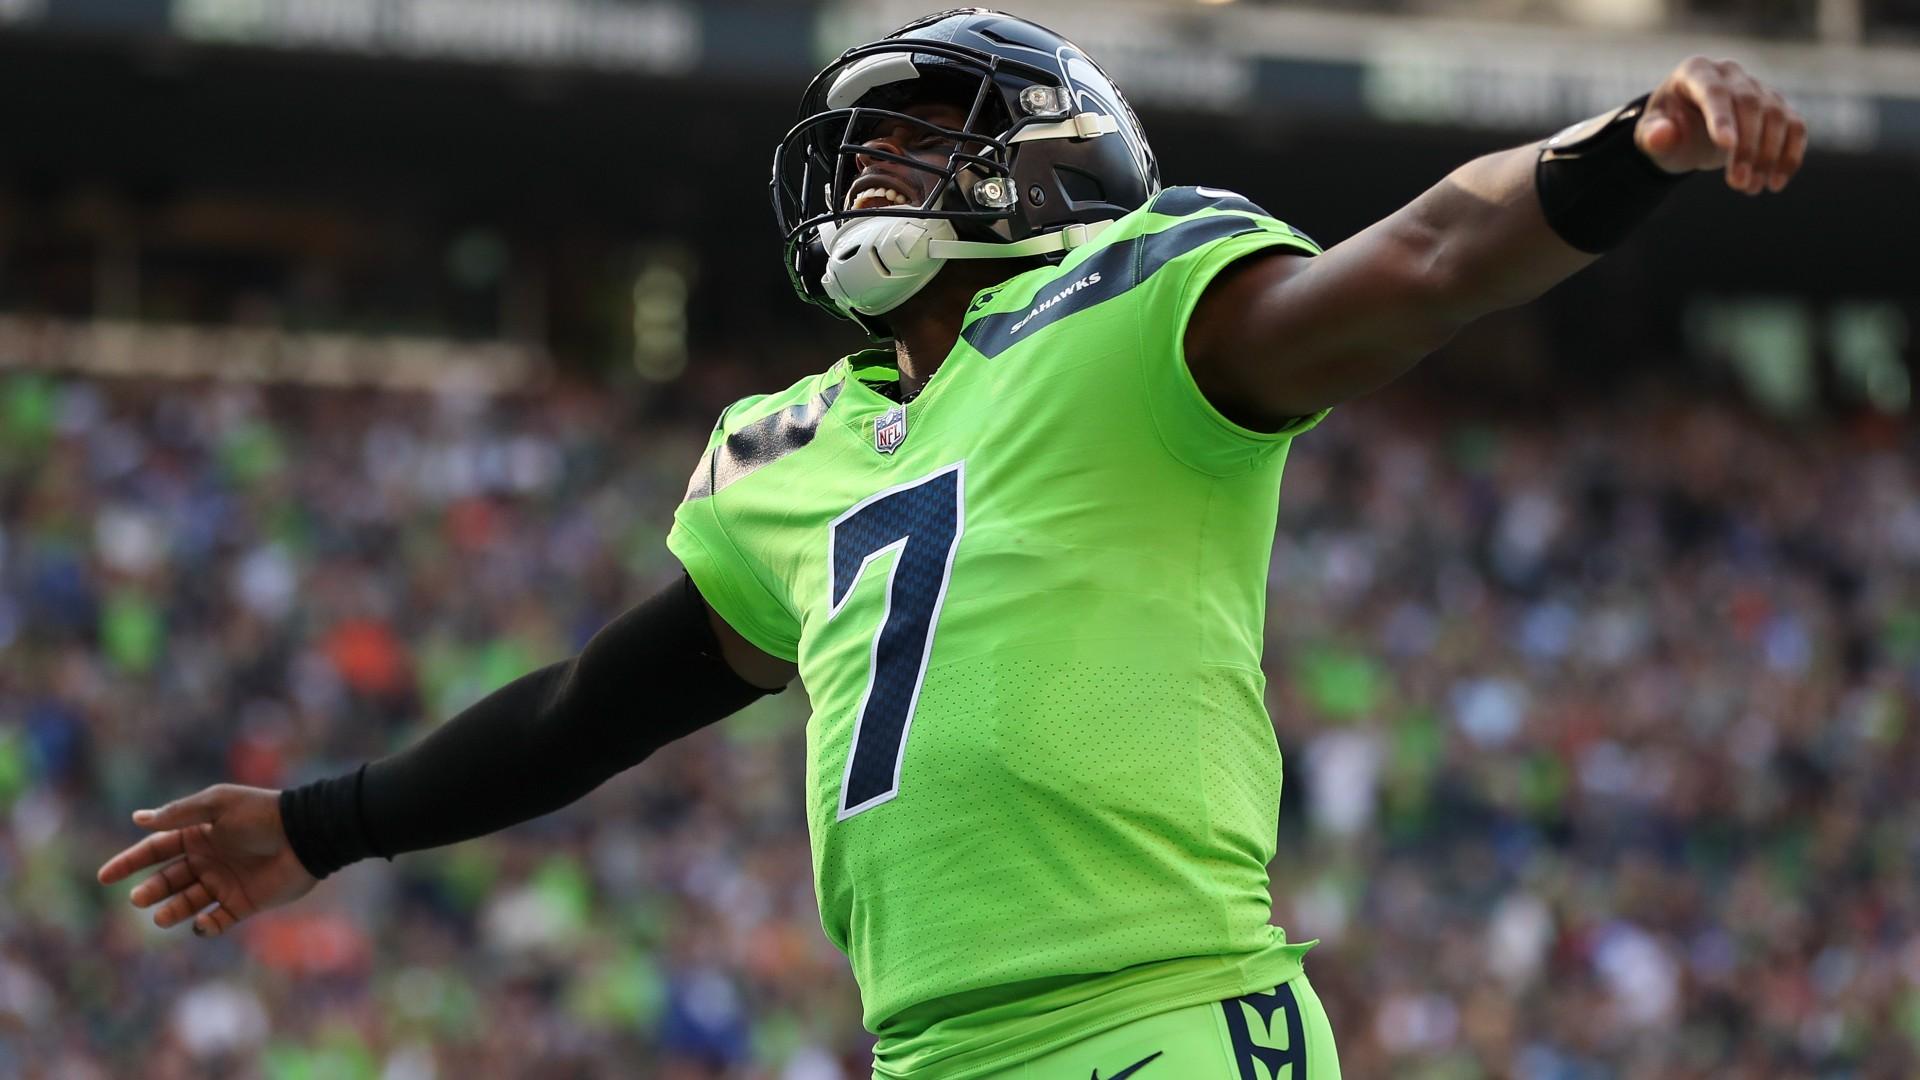  Geno Smith Opens Up About Seahawks' Big Changes and His New Chapter Under Coach Macdonald